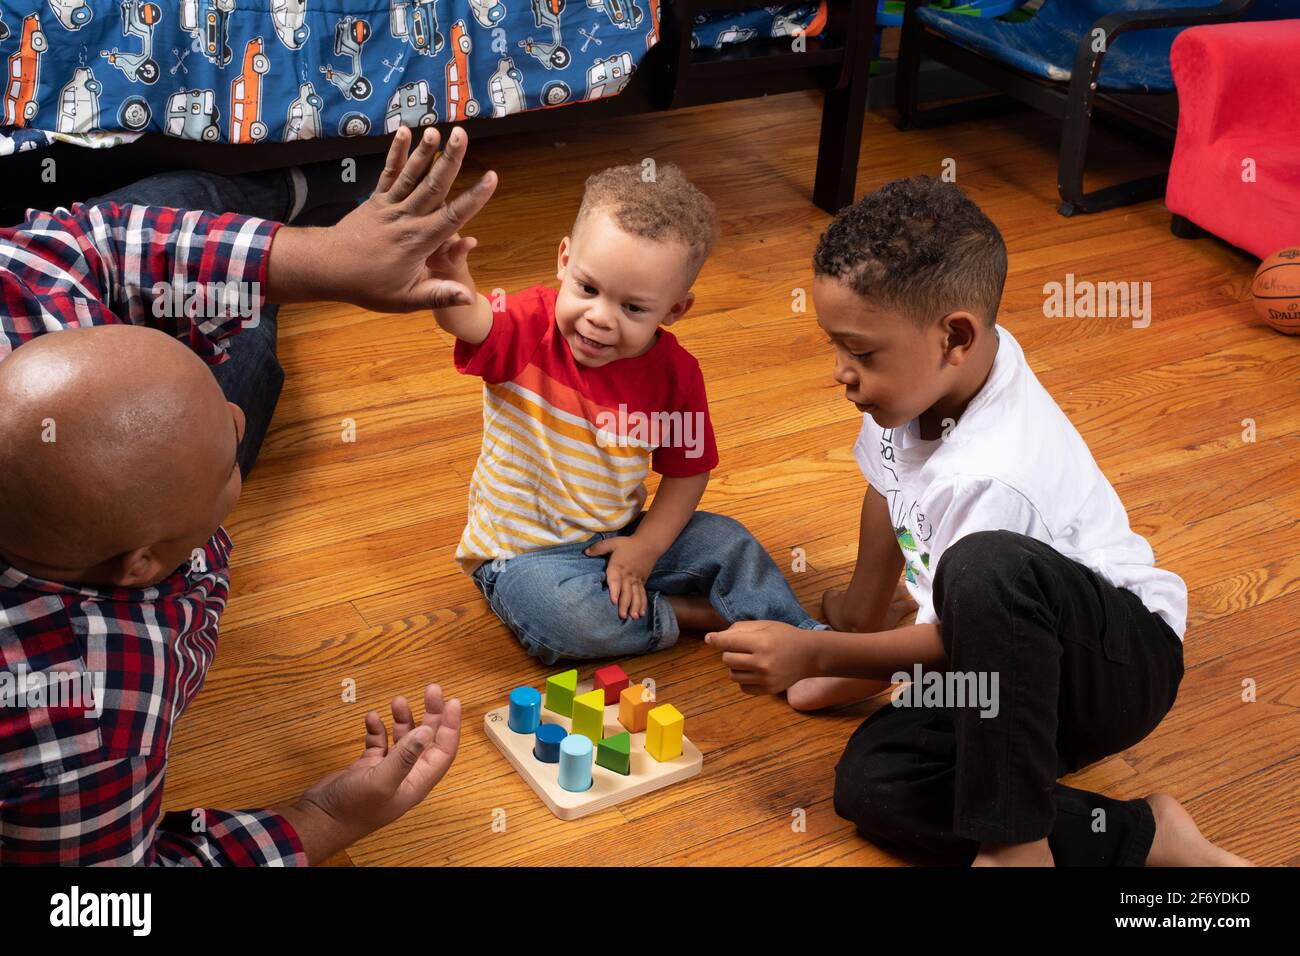 Brothers, ages 2 and 6 playing with geometric shape sorter, father giving 2 year old a “high 5” for success Stock Photo